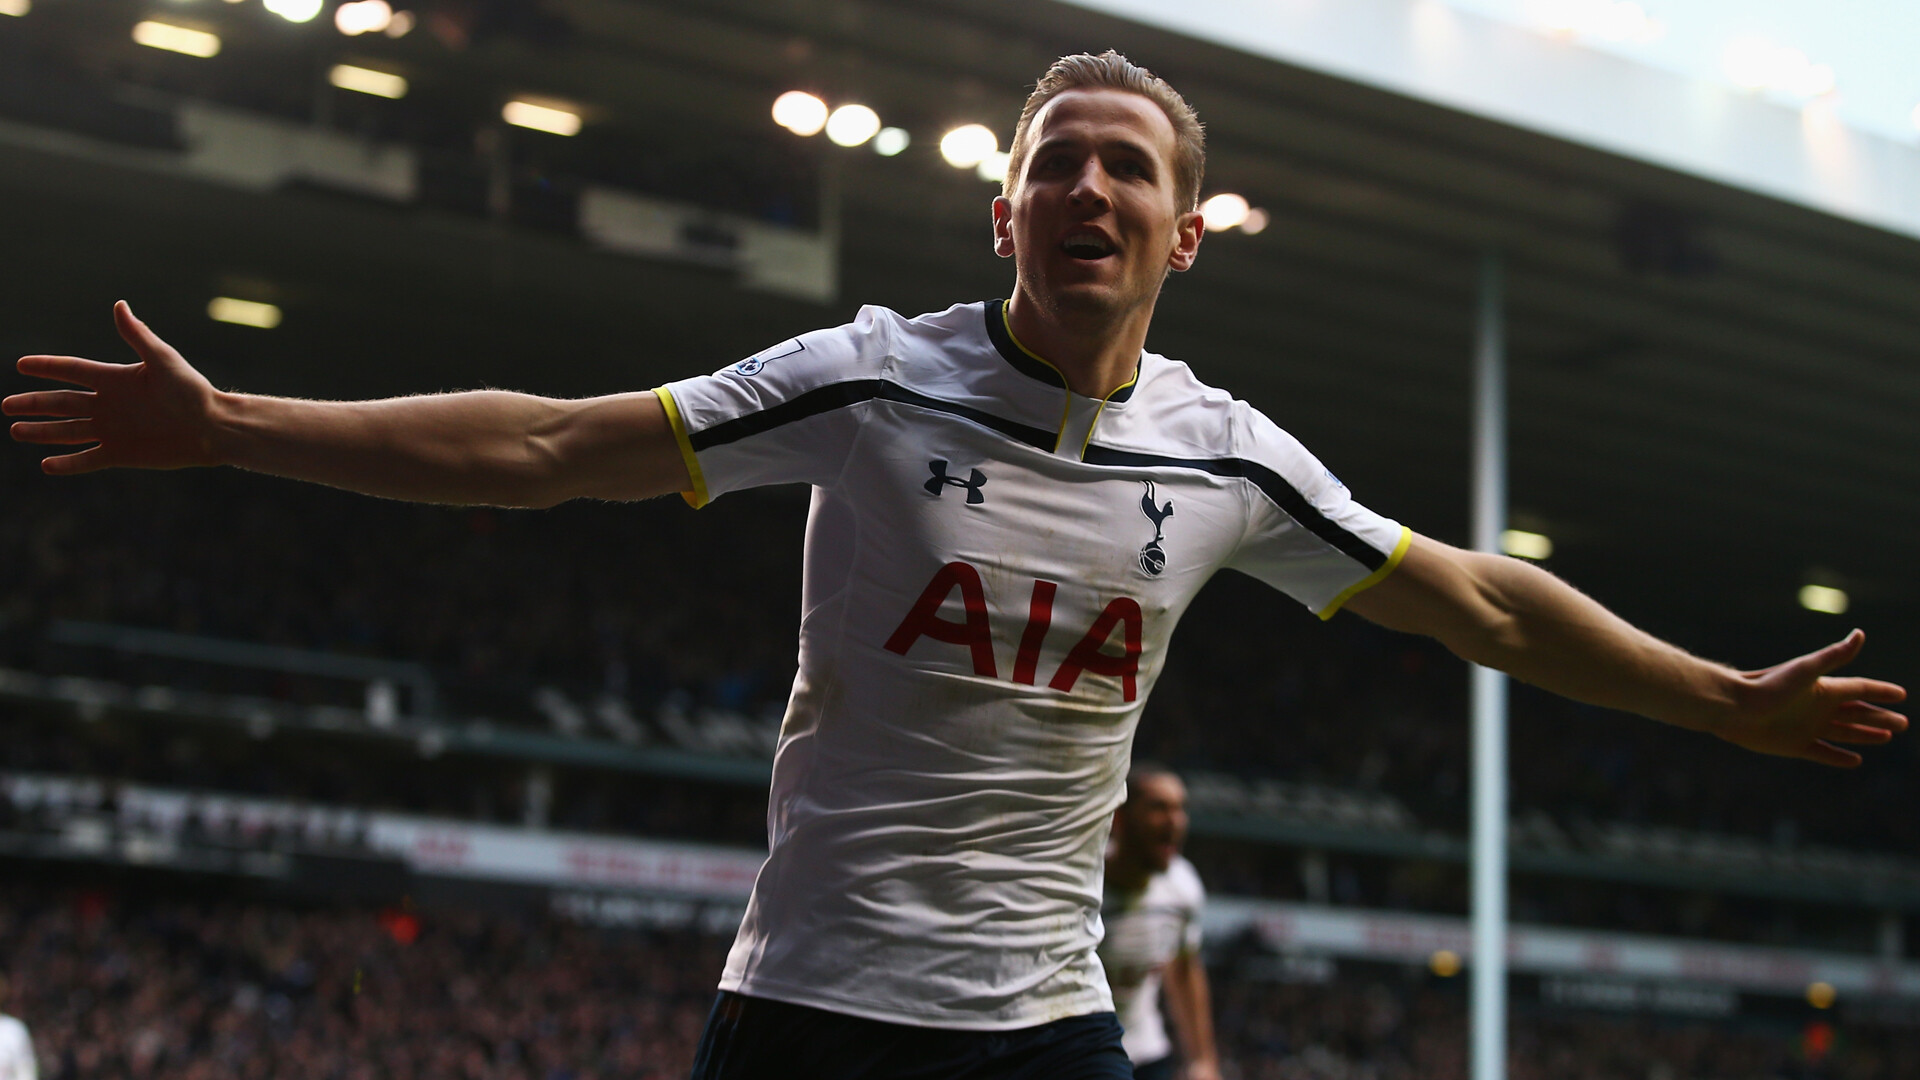 Harry Kane: He was given his first Premier League start for Tottenham on 7 April 2014. 1920x1080 Full HD Wallpaper.